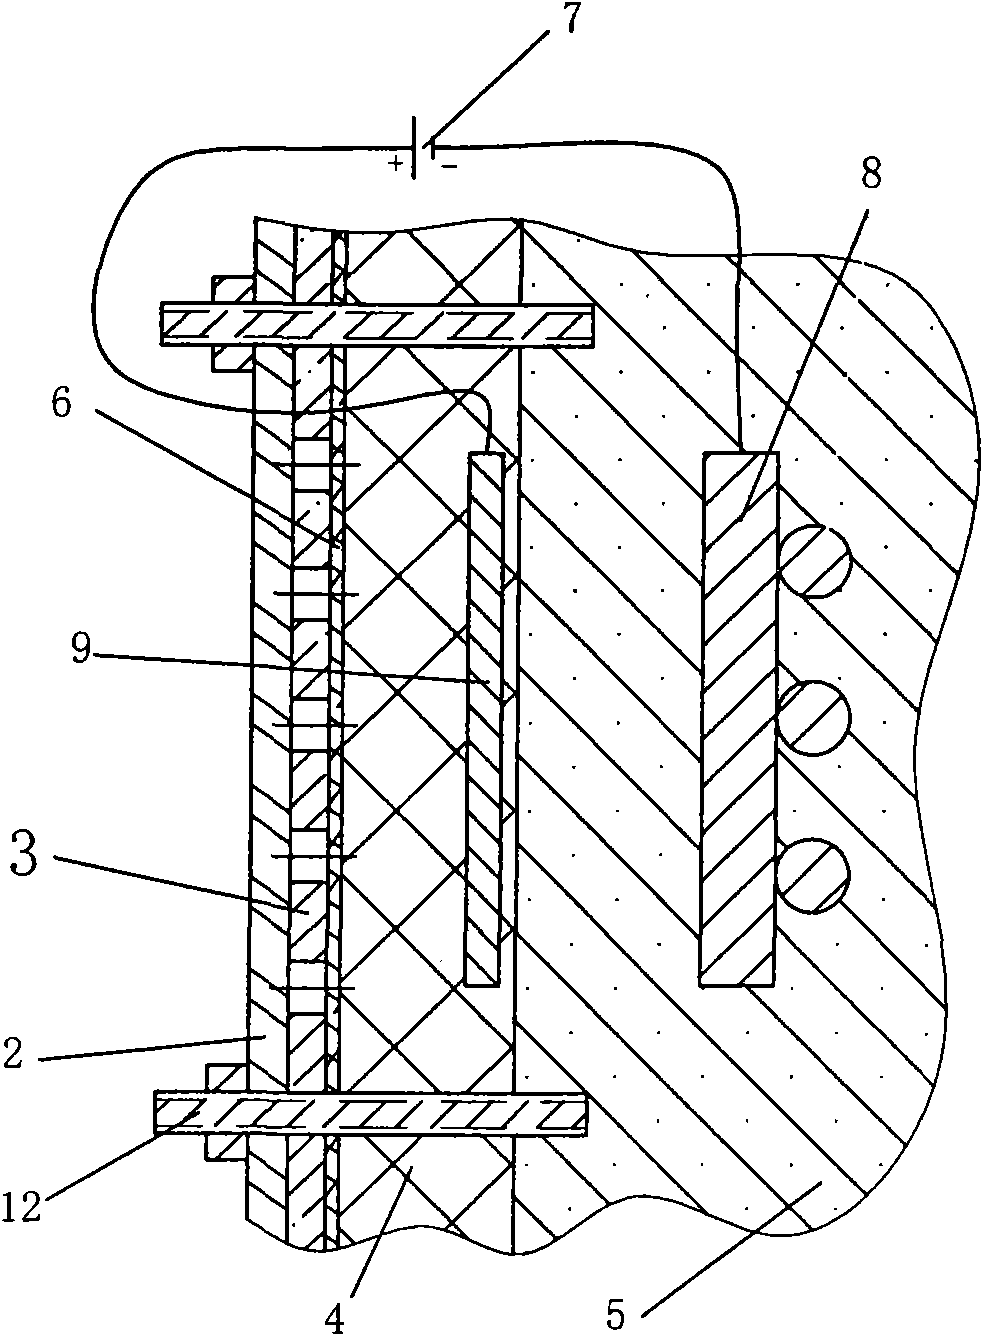 BE rust inhibitor based method and device for restoring electroosmotic salt polluted buildings